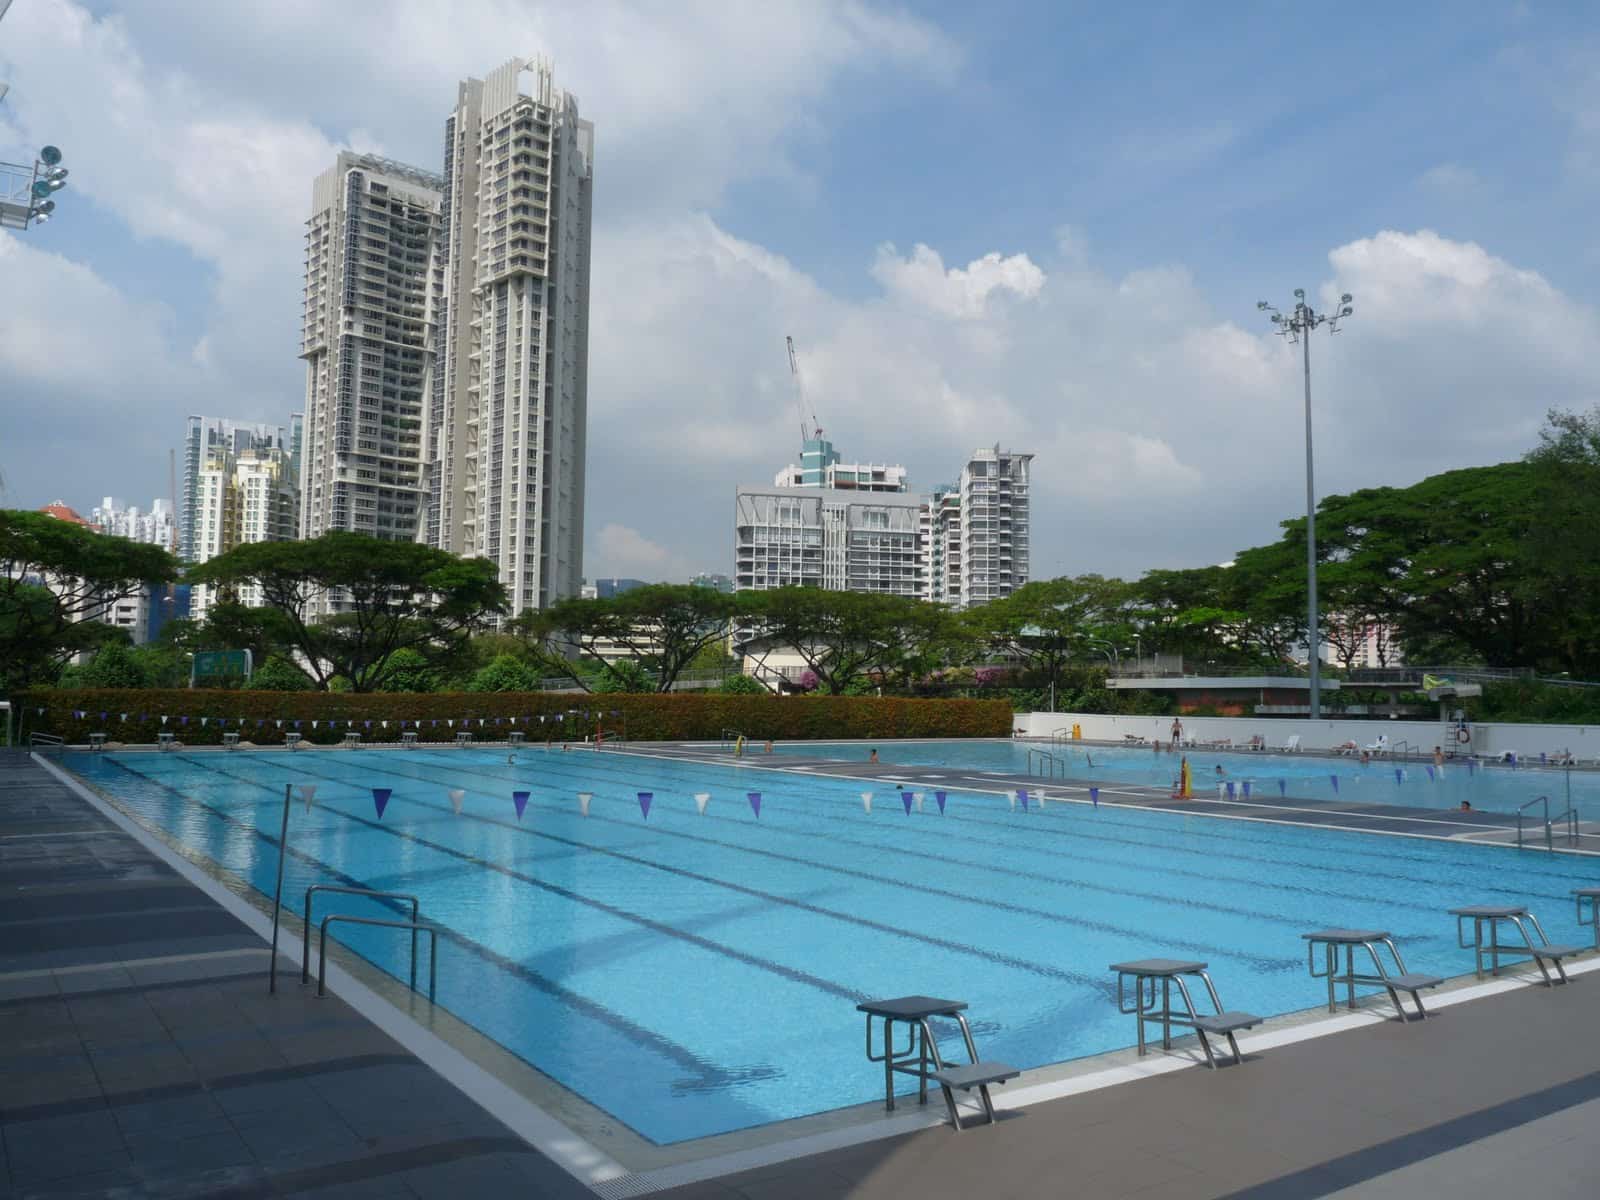 Pools are usually filled! Source: swimminglessons.com.sg